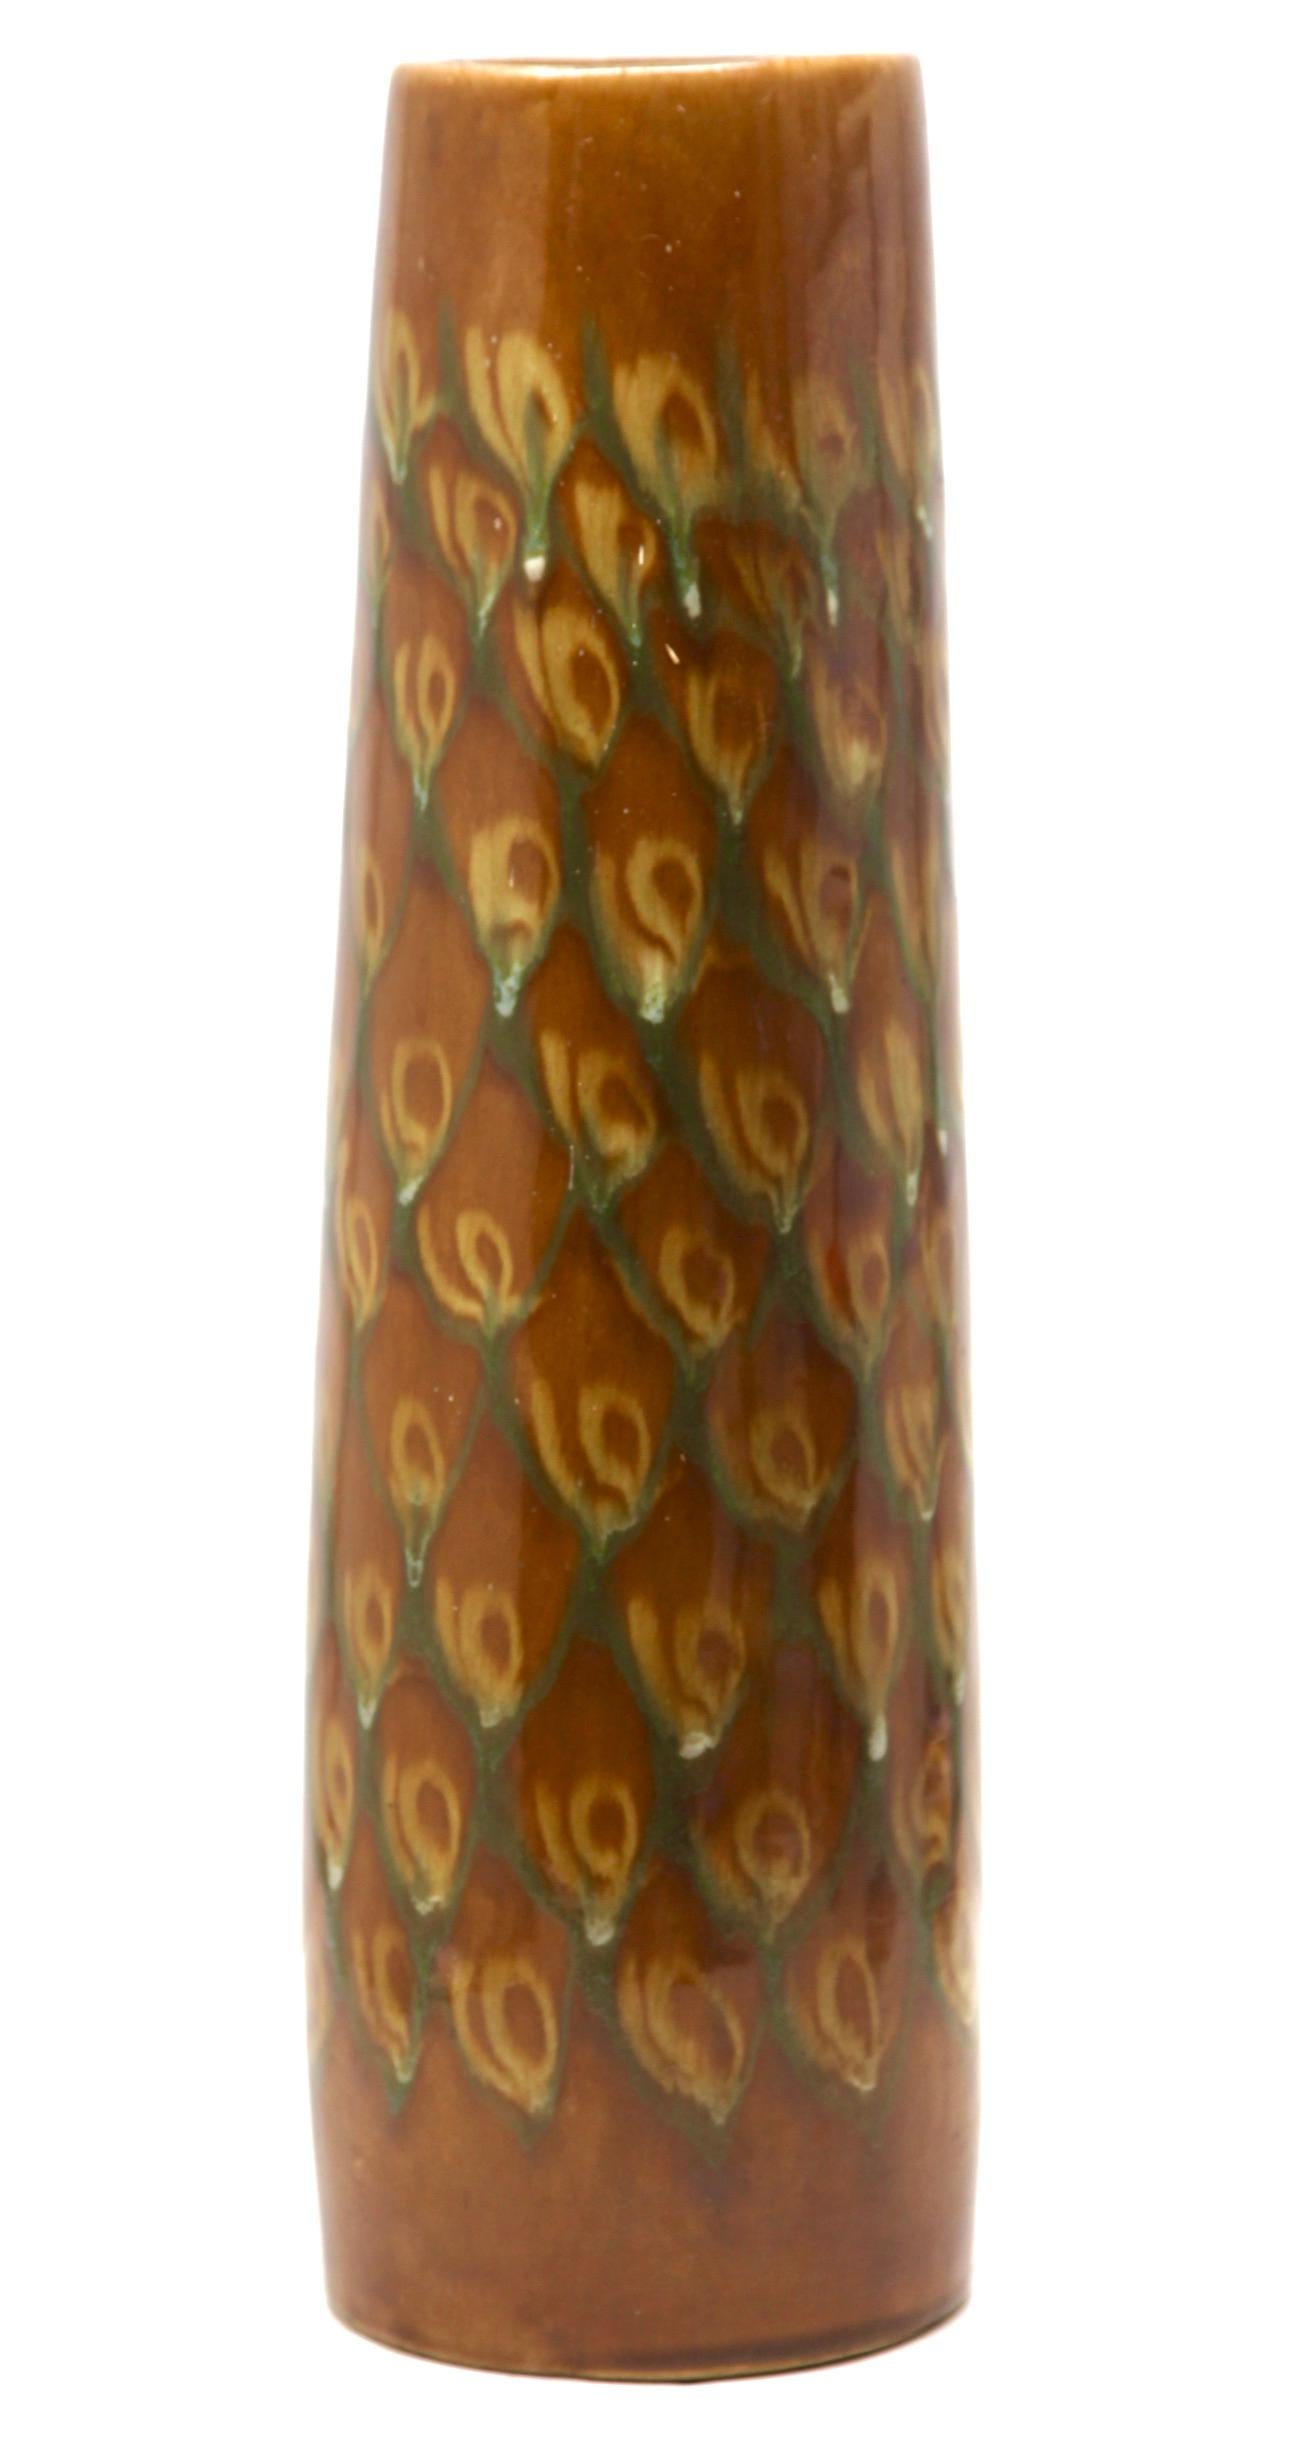 These original Floor vintage vase was produced in the 1960s in Germany. It is made of ceramic pottery. whit Slip Glaze Representation of peacock feathers
The bottom are marked the vase Handarbeit.
Straight forward and minimalistic design of the